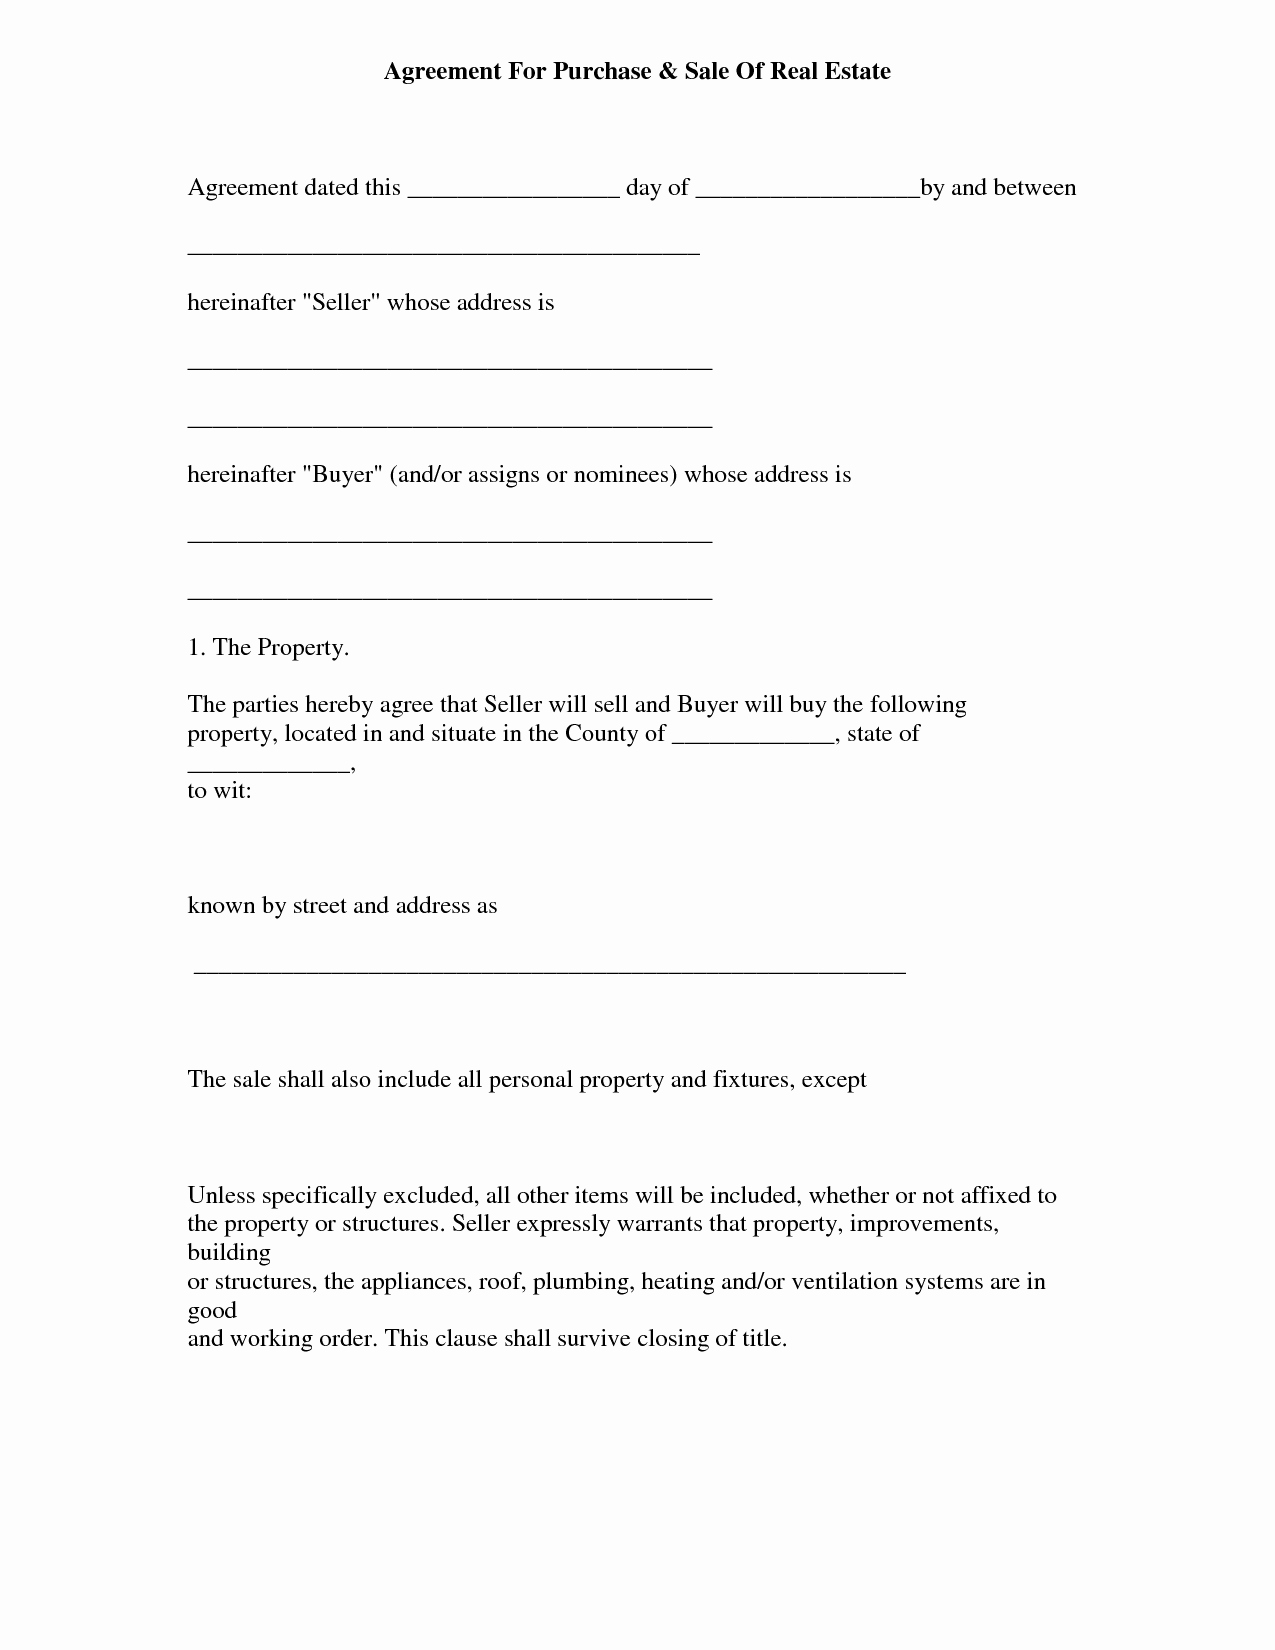 Contract Purchase Sale Agreement form Sample for Real